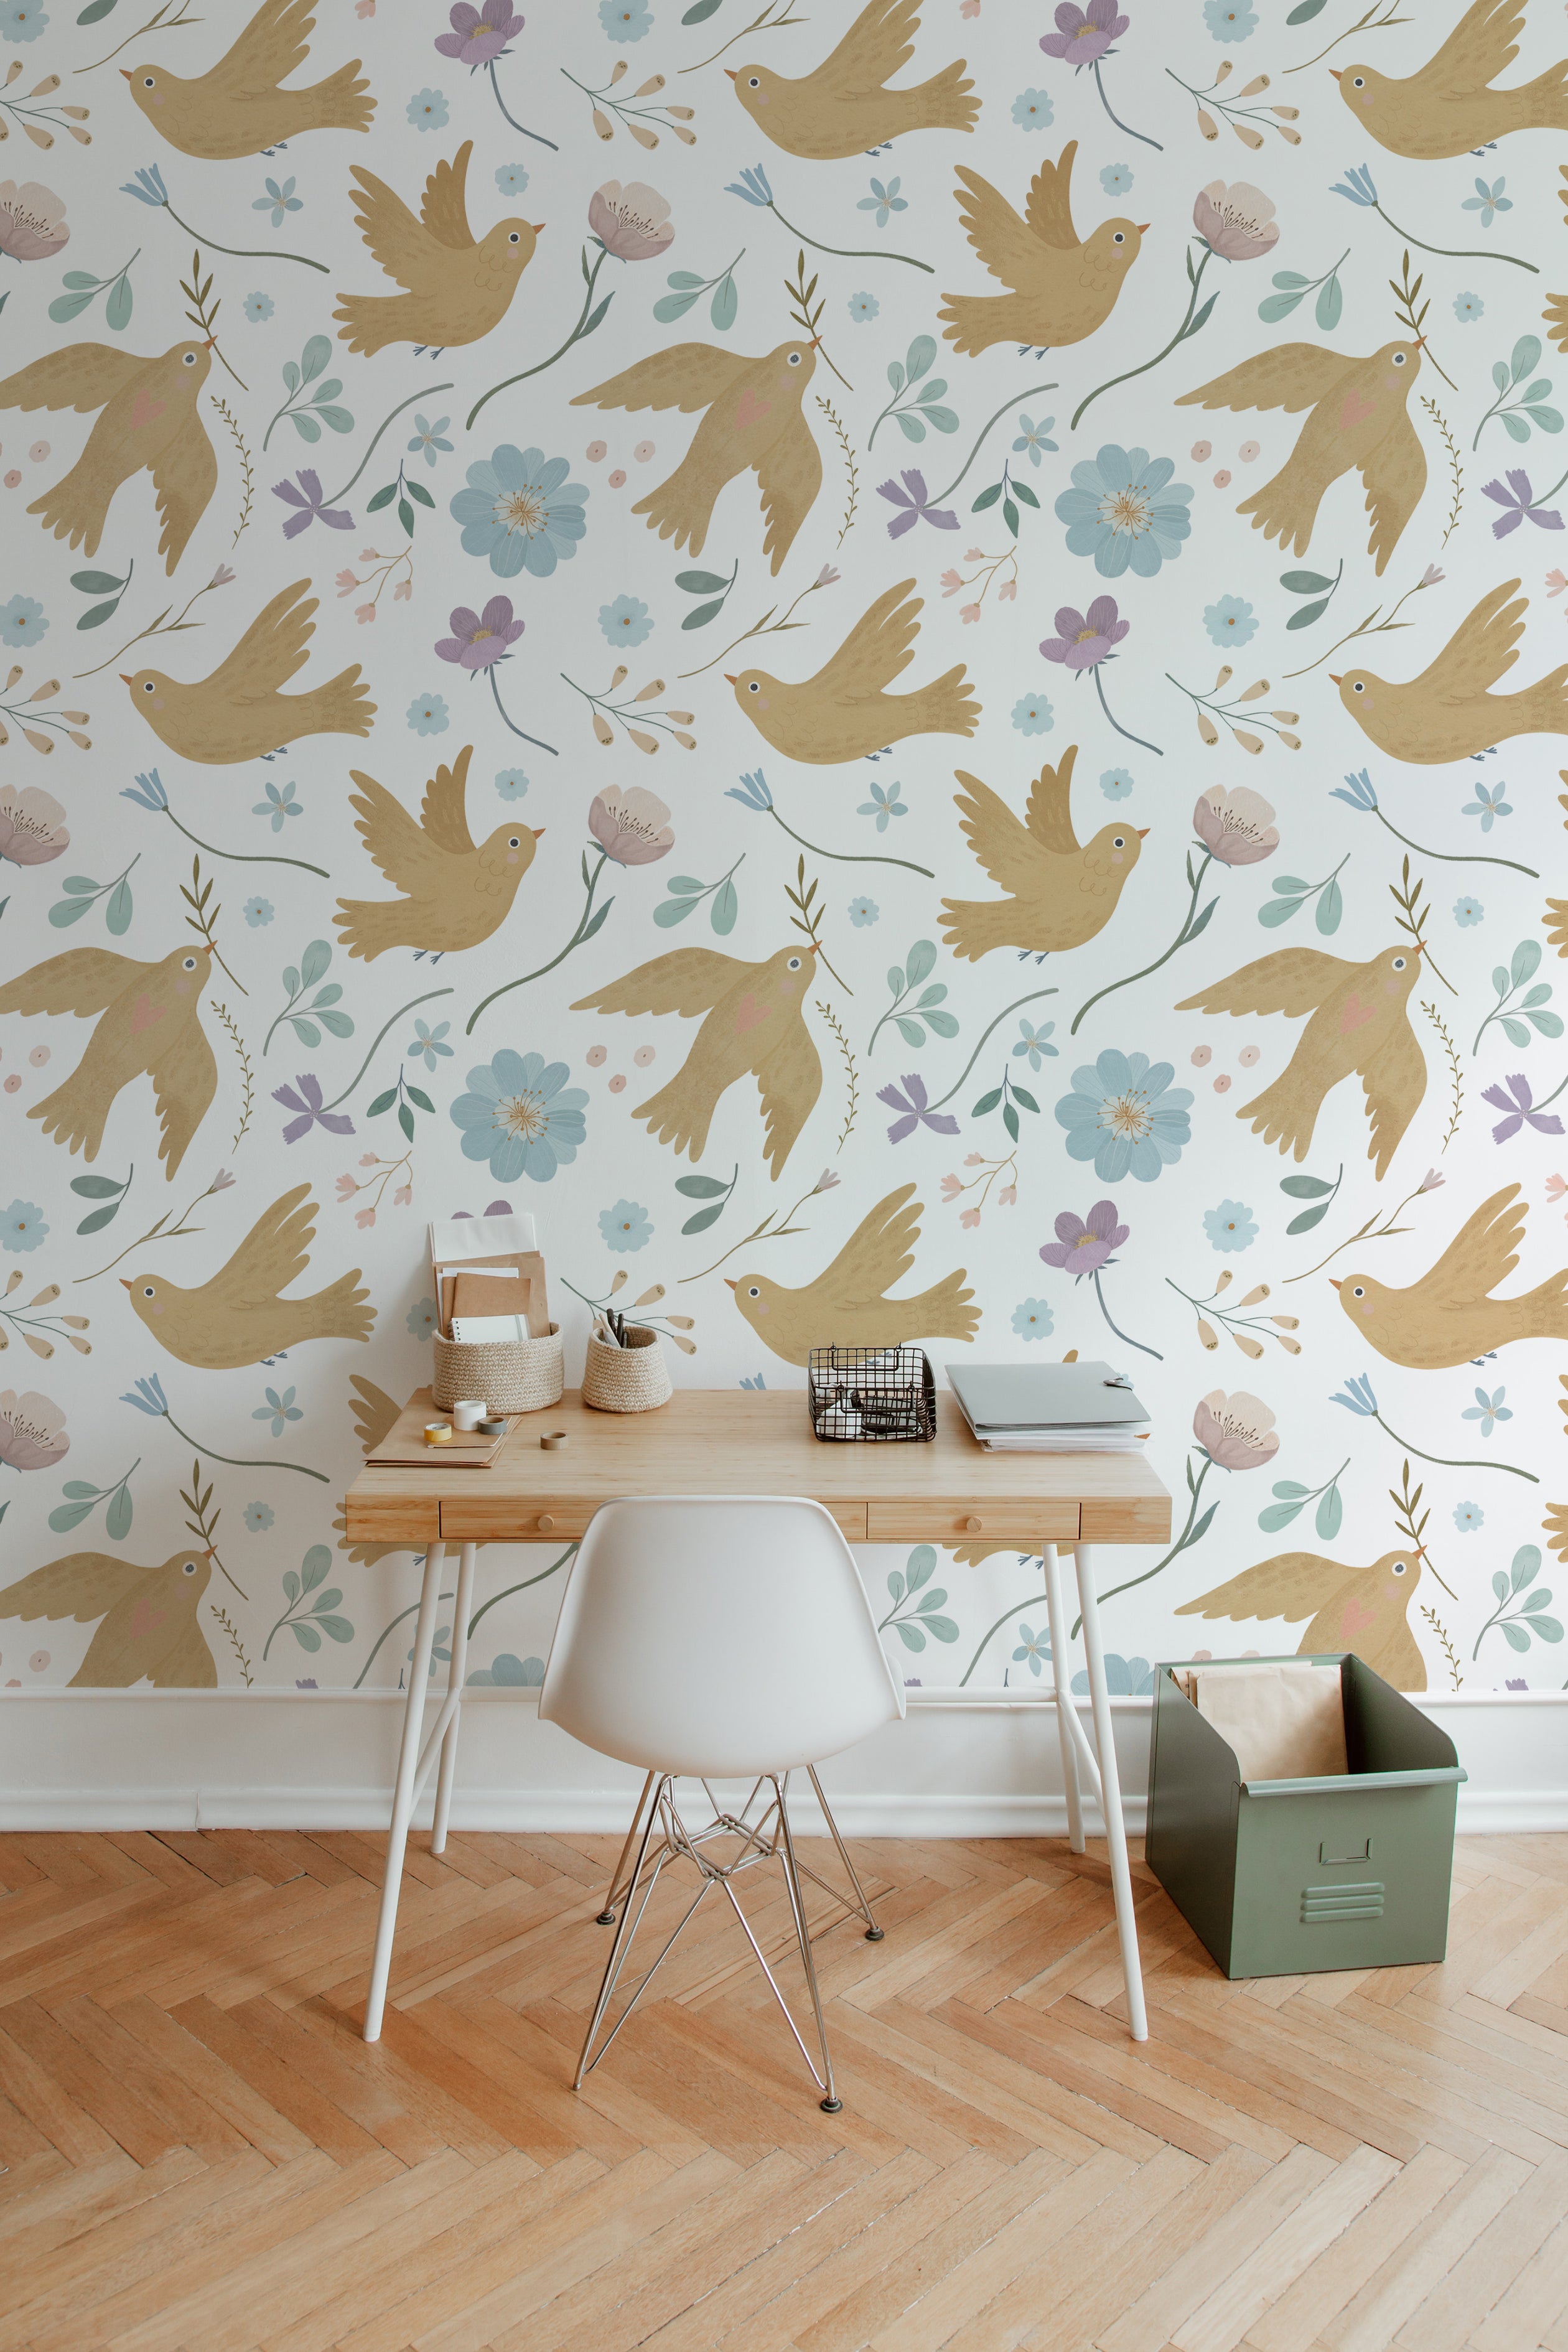 Interior view of a room with Pastel Bird Wallpaper - Large, showcasing a cozy workspace with a wooden desk and white chair against a backdrop of tan birds and pastel flowers.